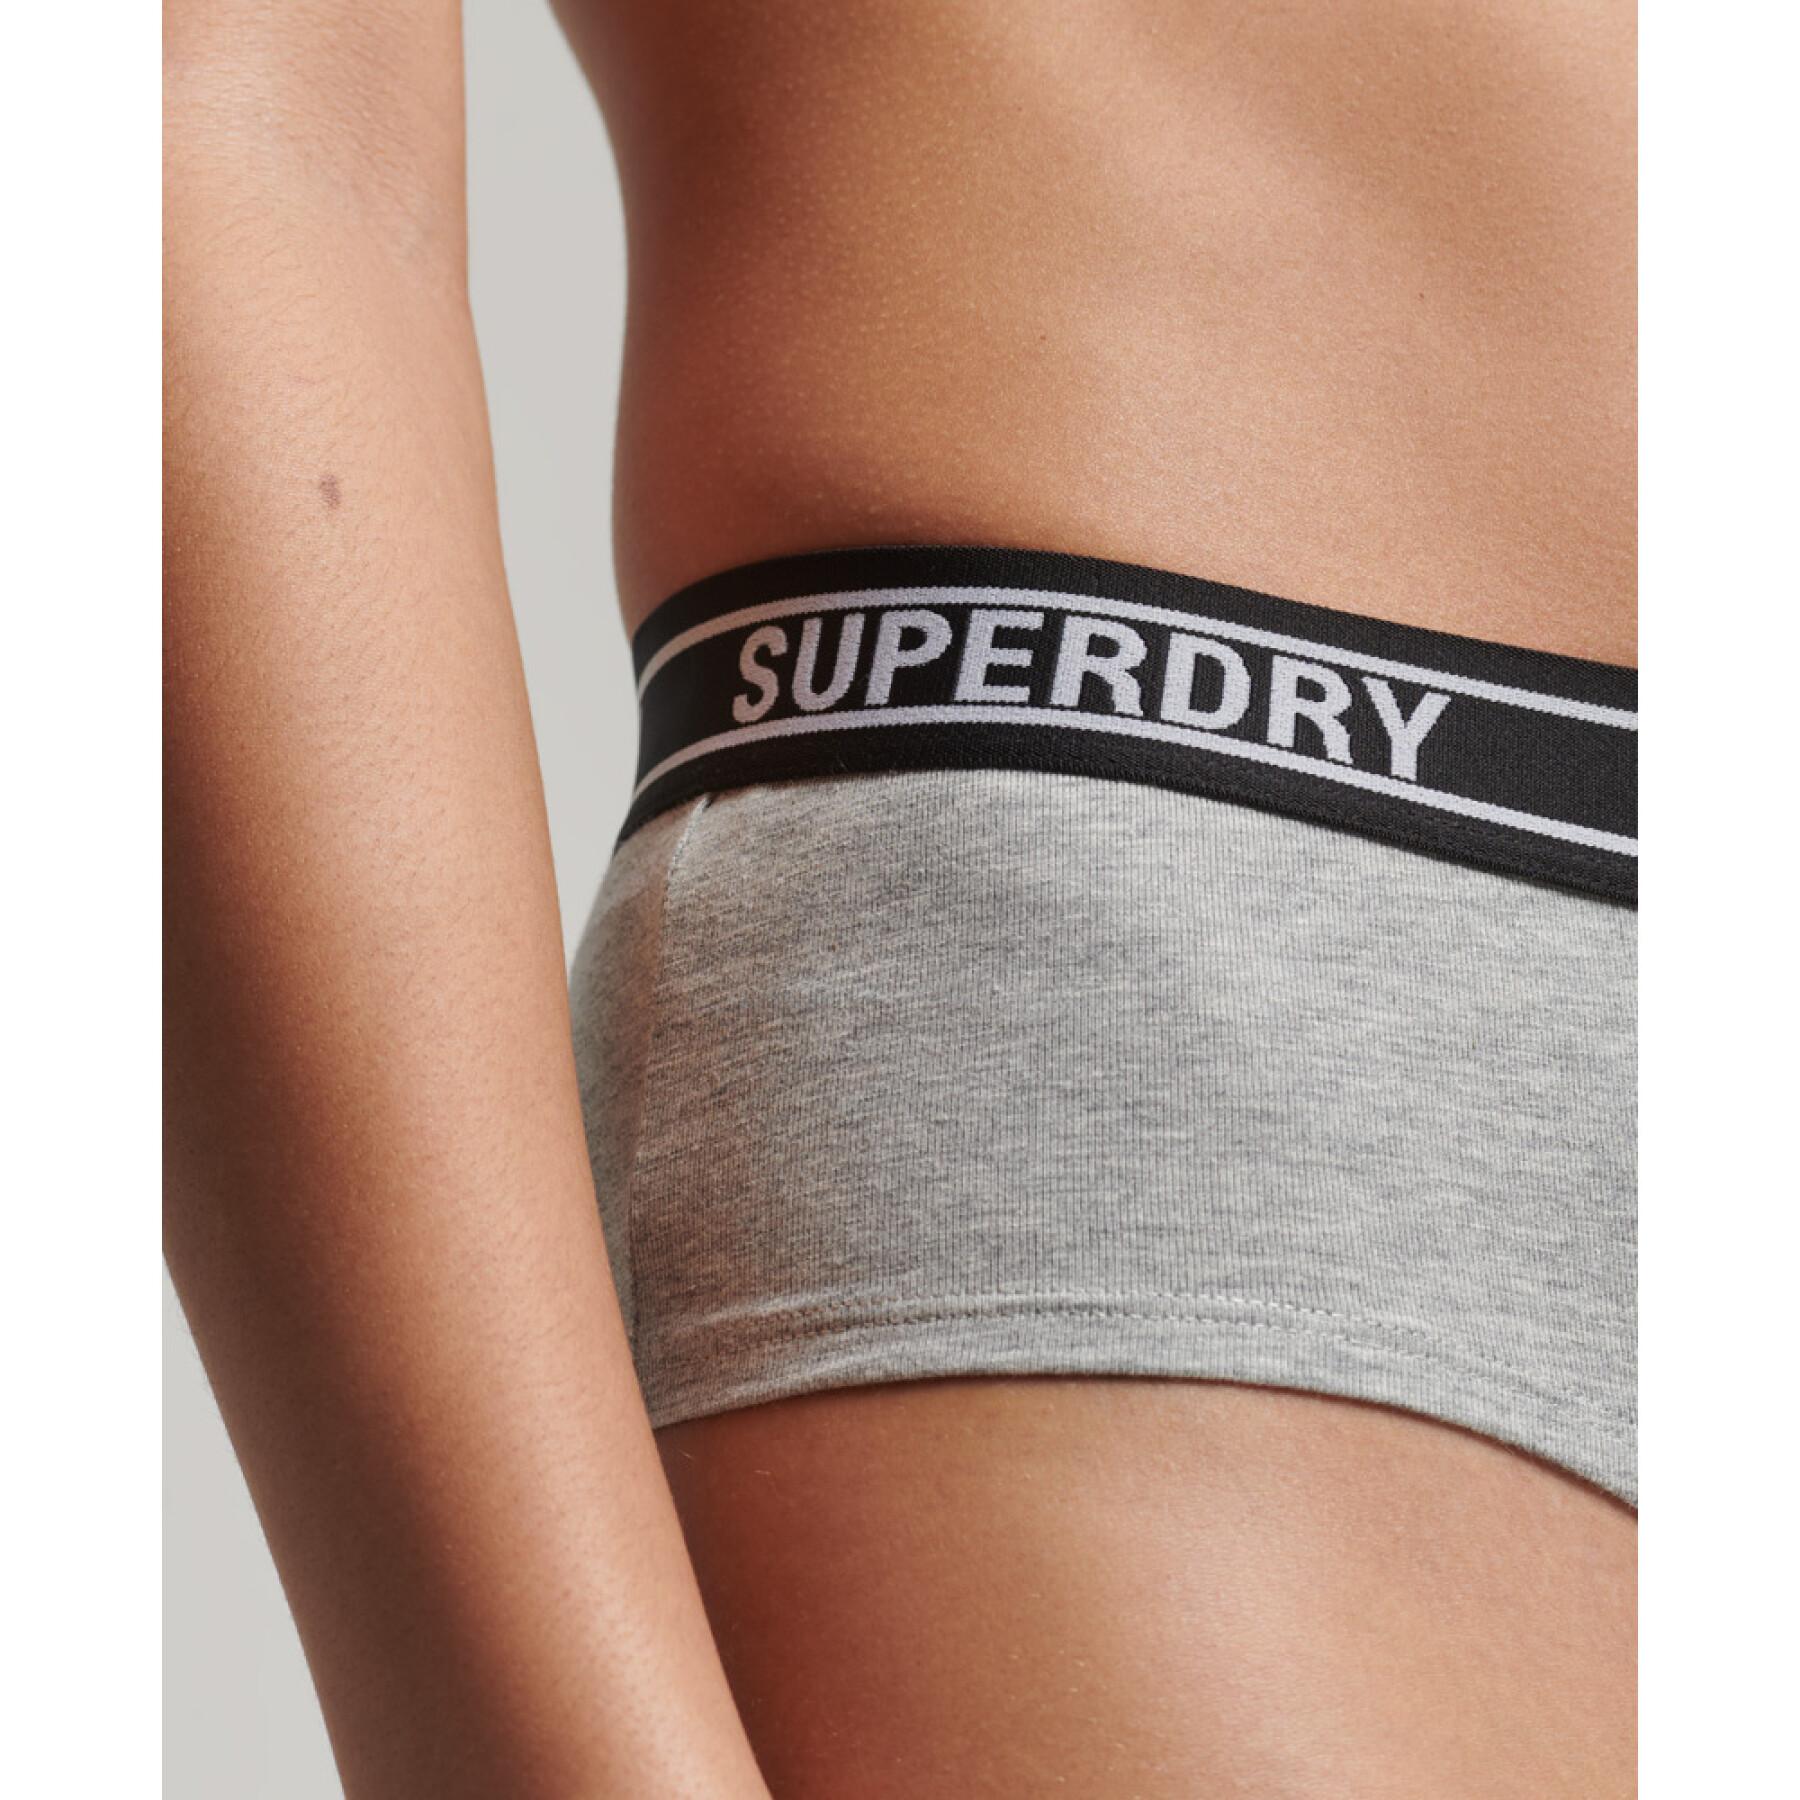 Women's organic cotton low waist shorts with multi logo Superdry